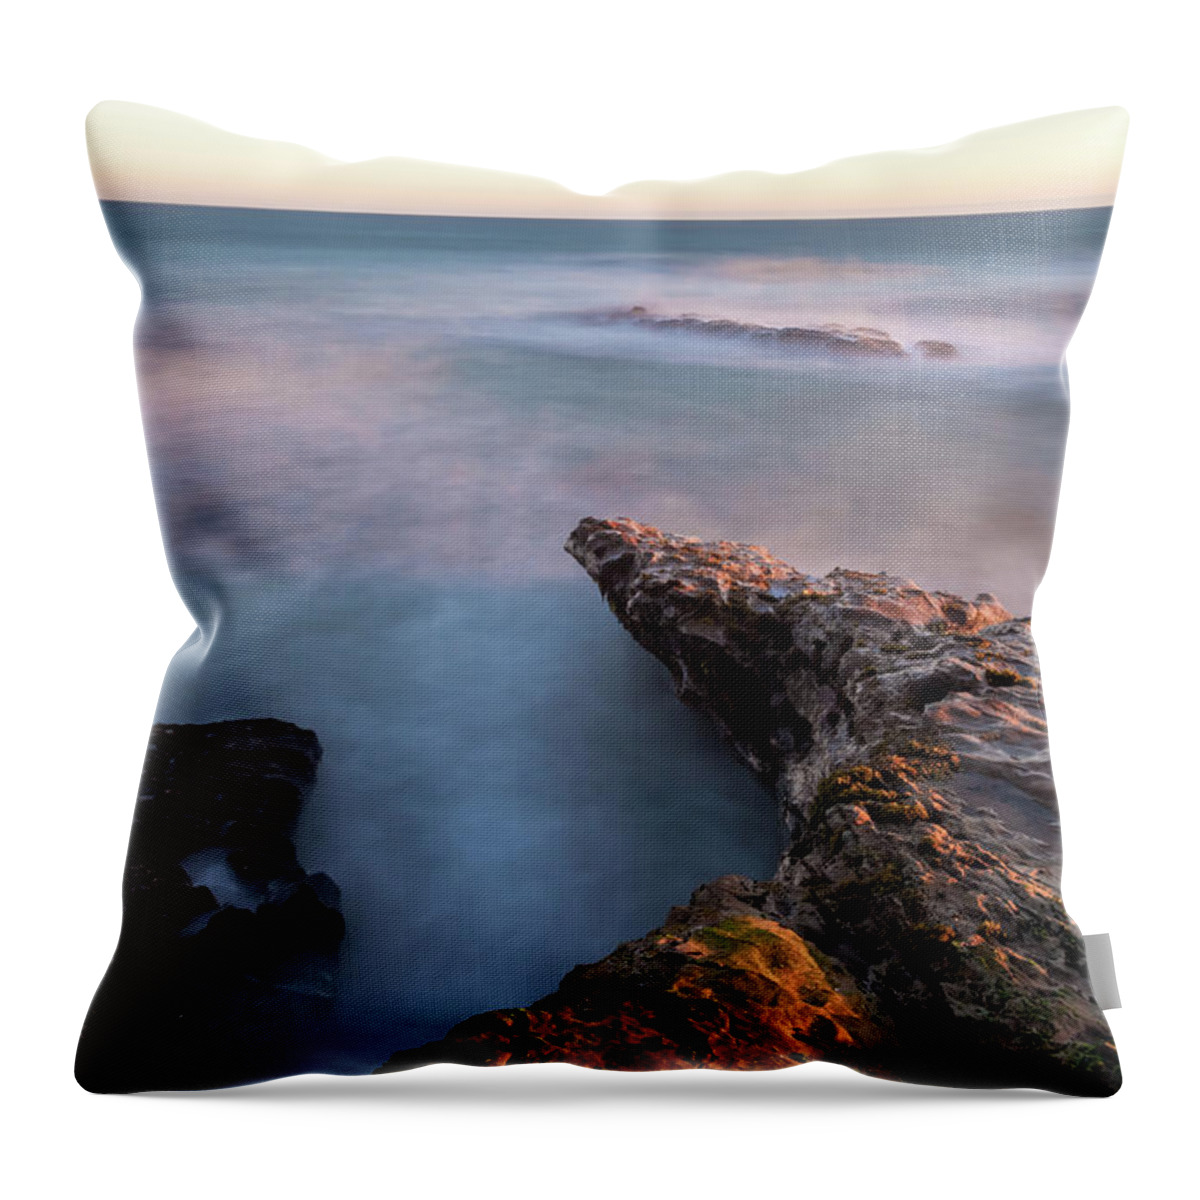 Landscape Throw Pillow featuring the photograph Pointed Rock by Jonathan Nguyen